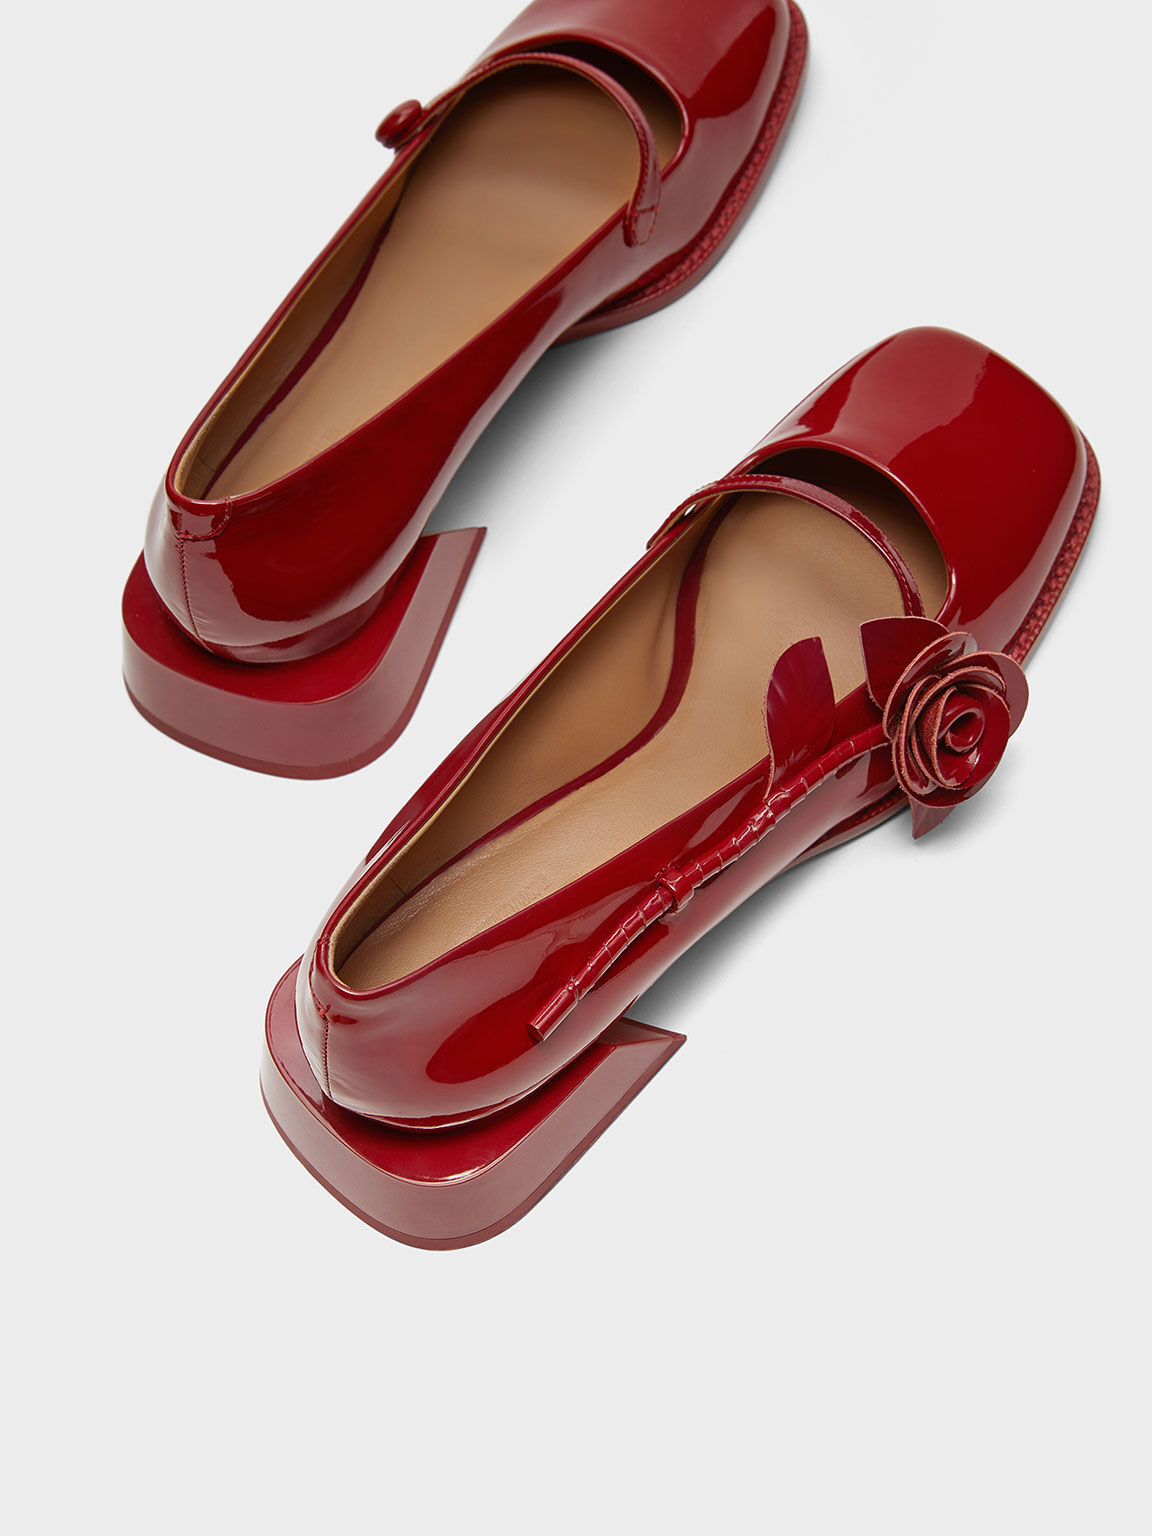 Chloris Patent Leather Rose-Embellished Mary Jane Pumps, Red, hi-res